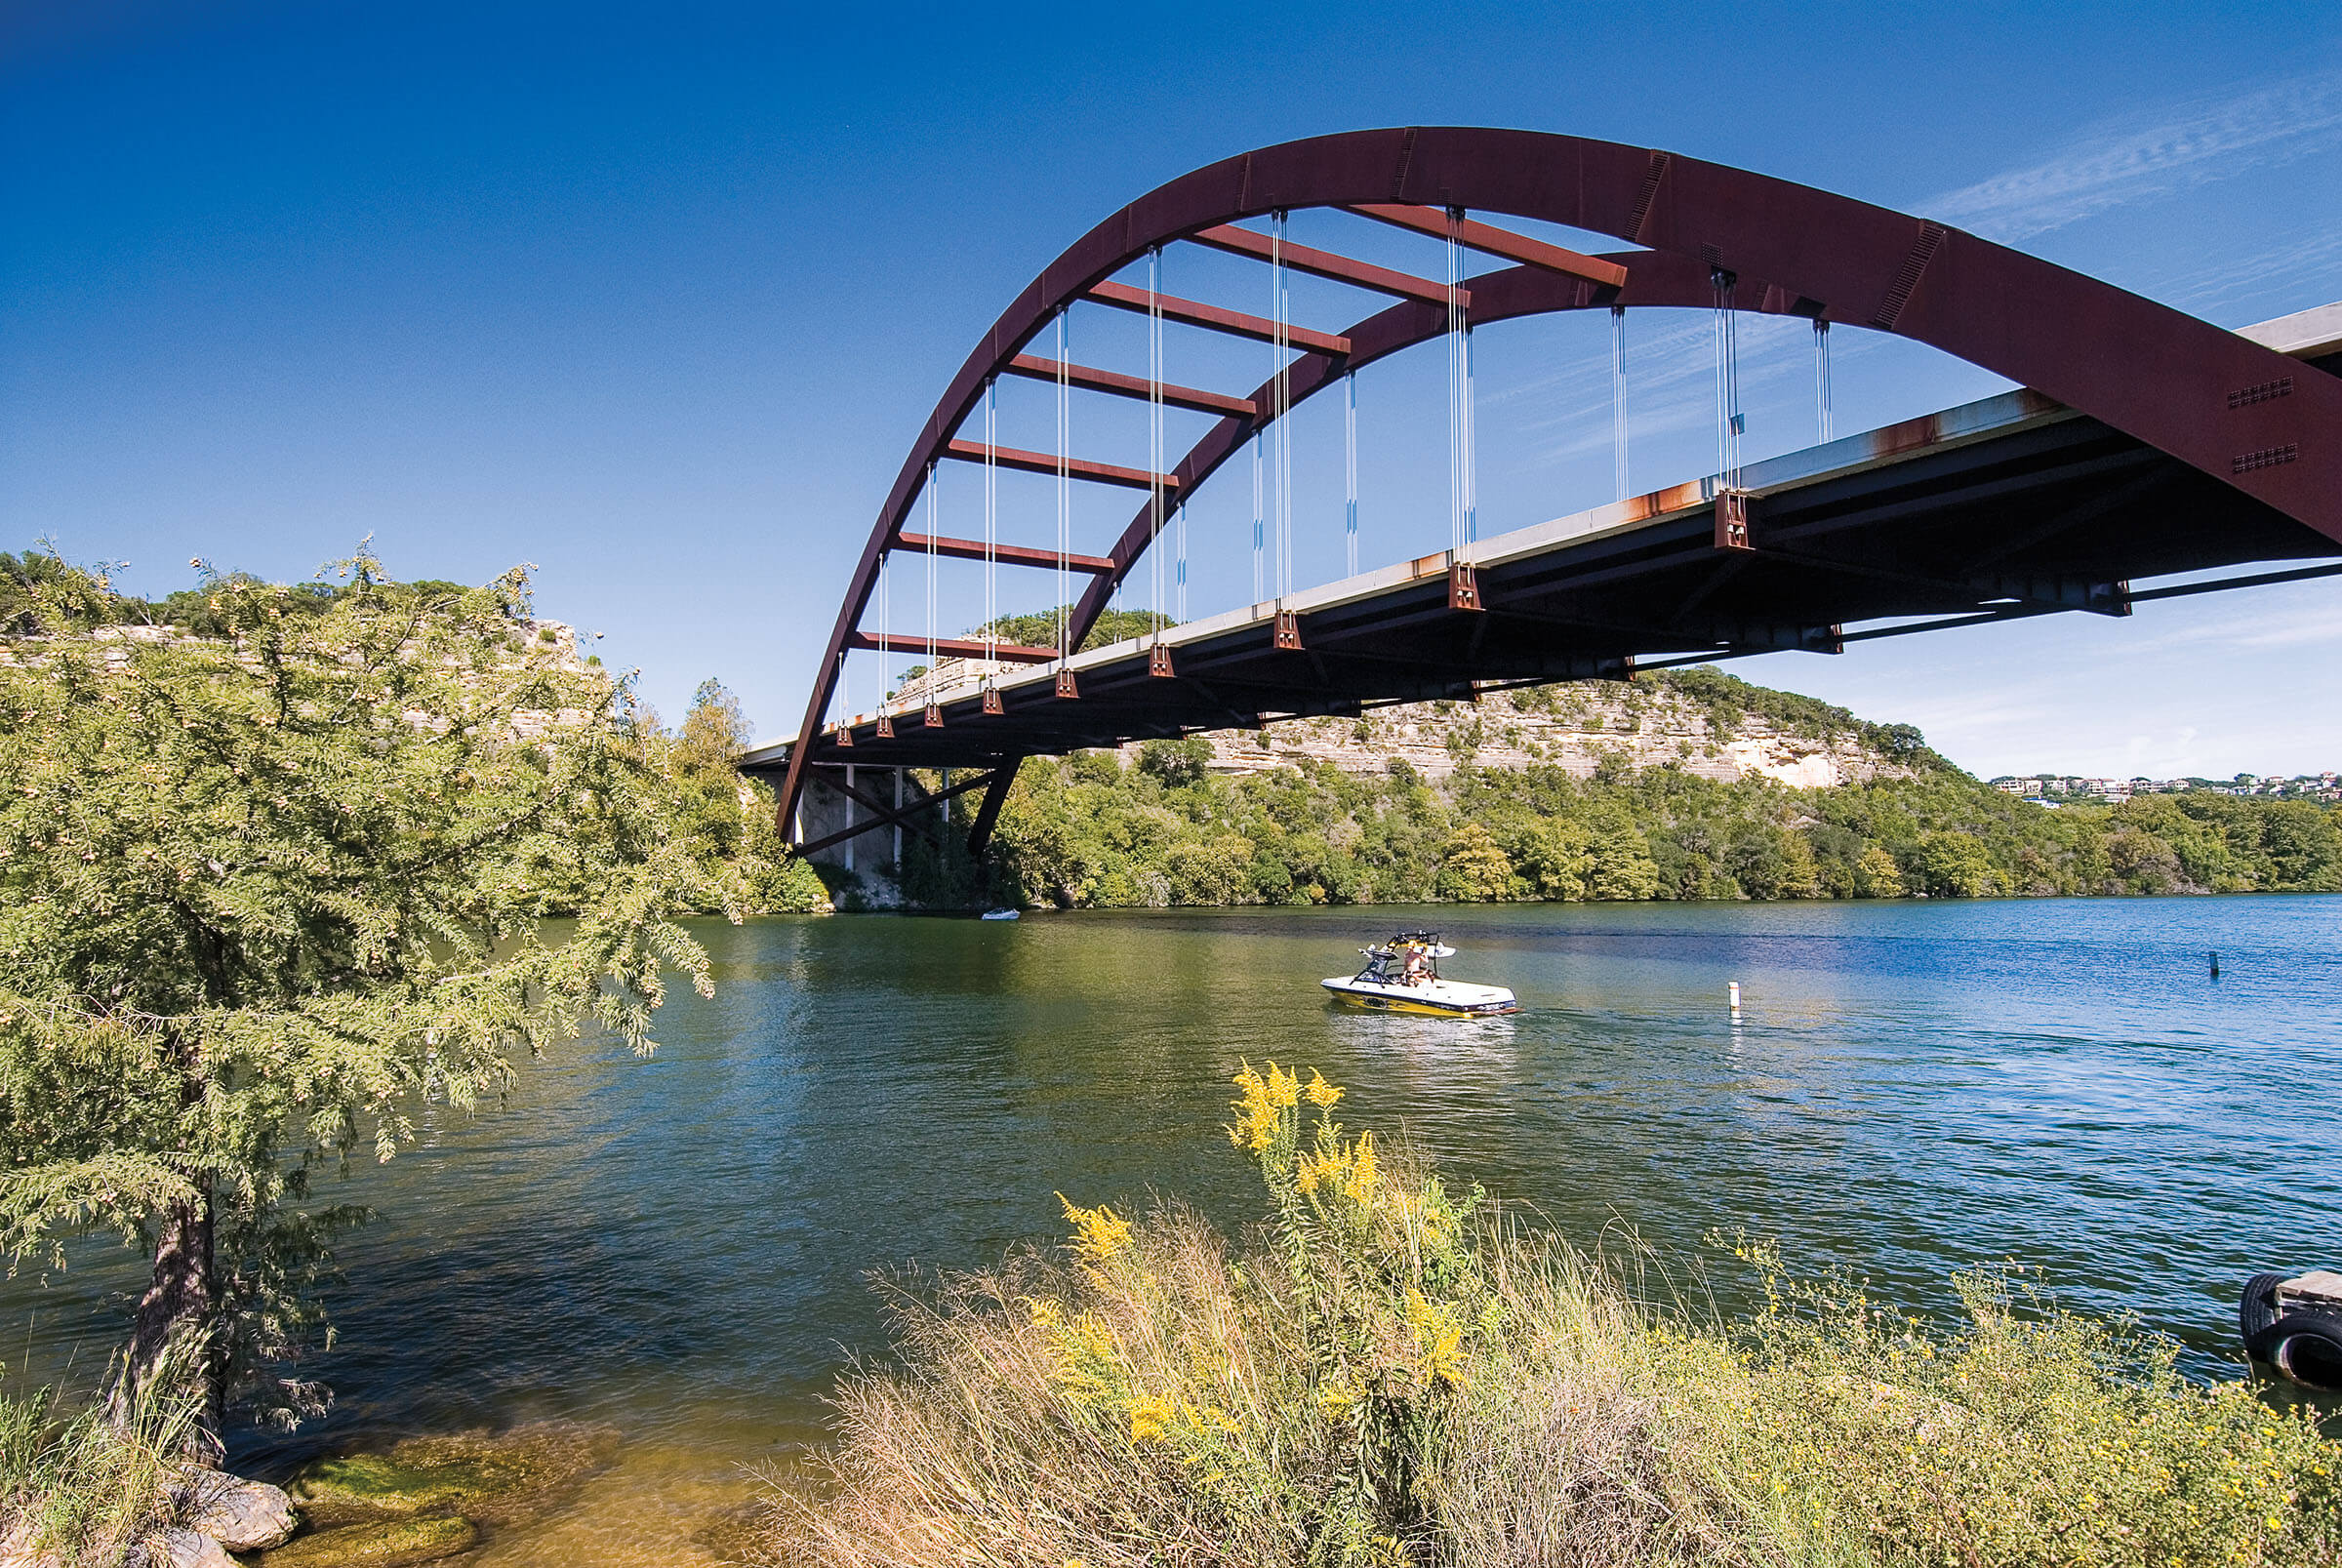 A photo from the shoreline of the Pennybacker Bridge in Austin, with blue sky, blue water and a yellow motorboat